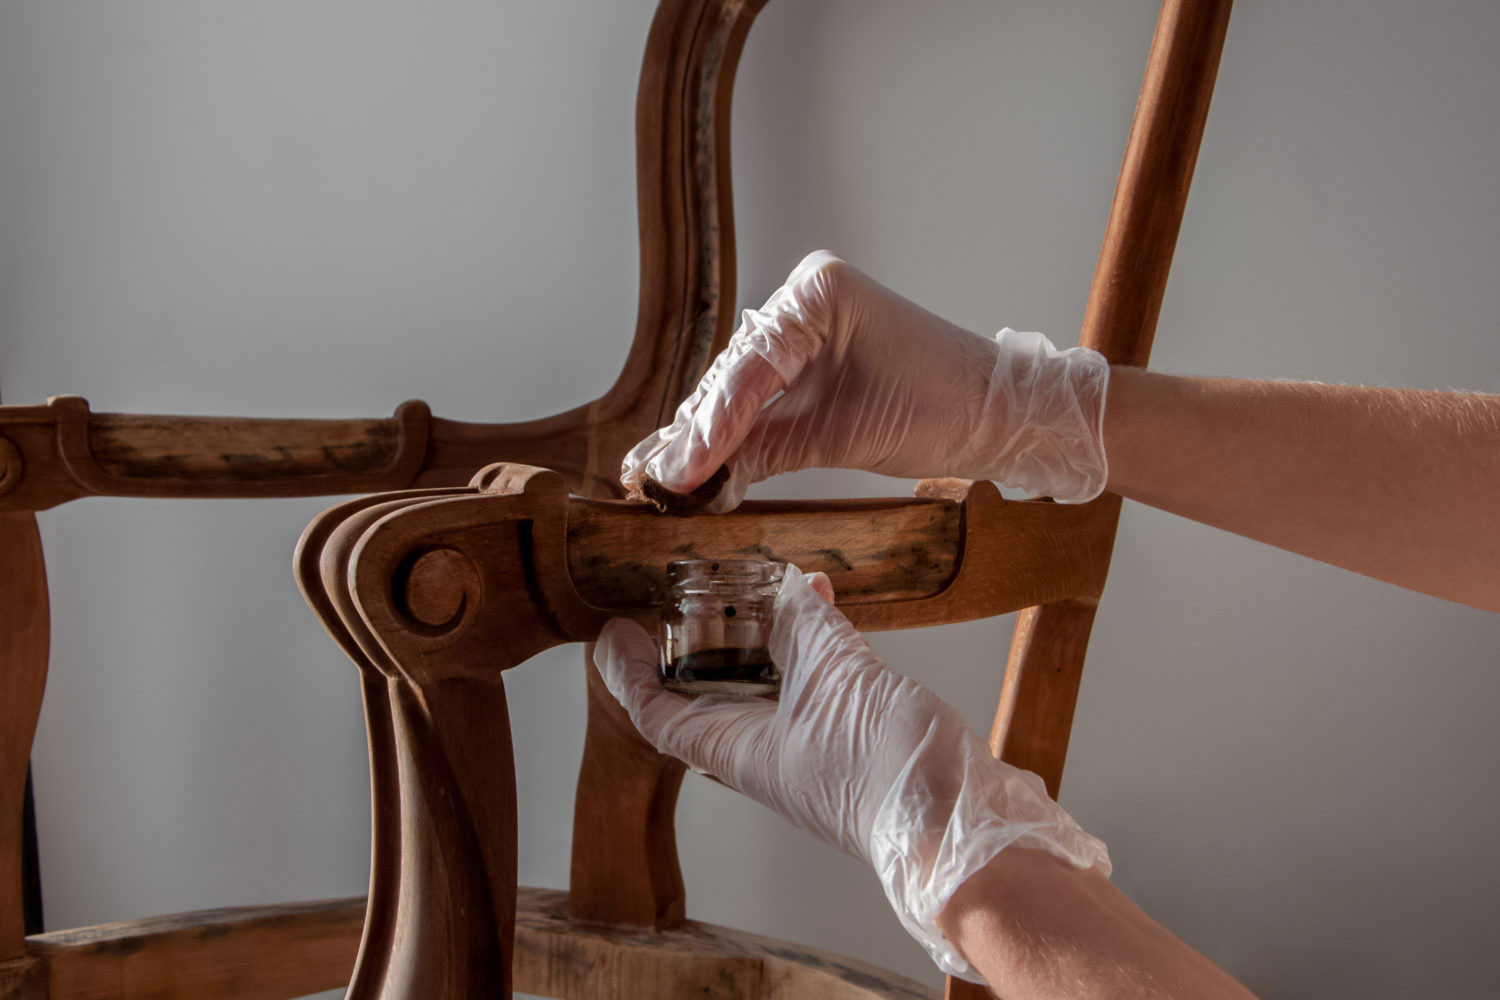 Processing Furniture Stain With A Swab Made Of Lint Free Cloth. All Parts Backrest, Armrest, Leg. Renovation Of Old Furniture As An Antique Victorian Old Wooden Armchair.